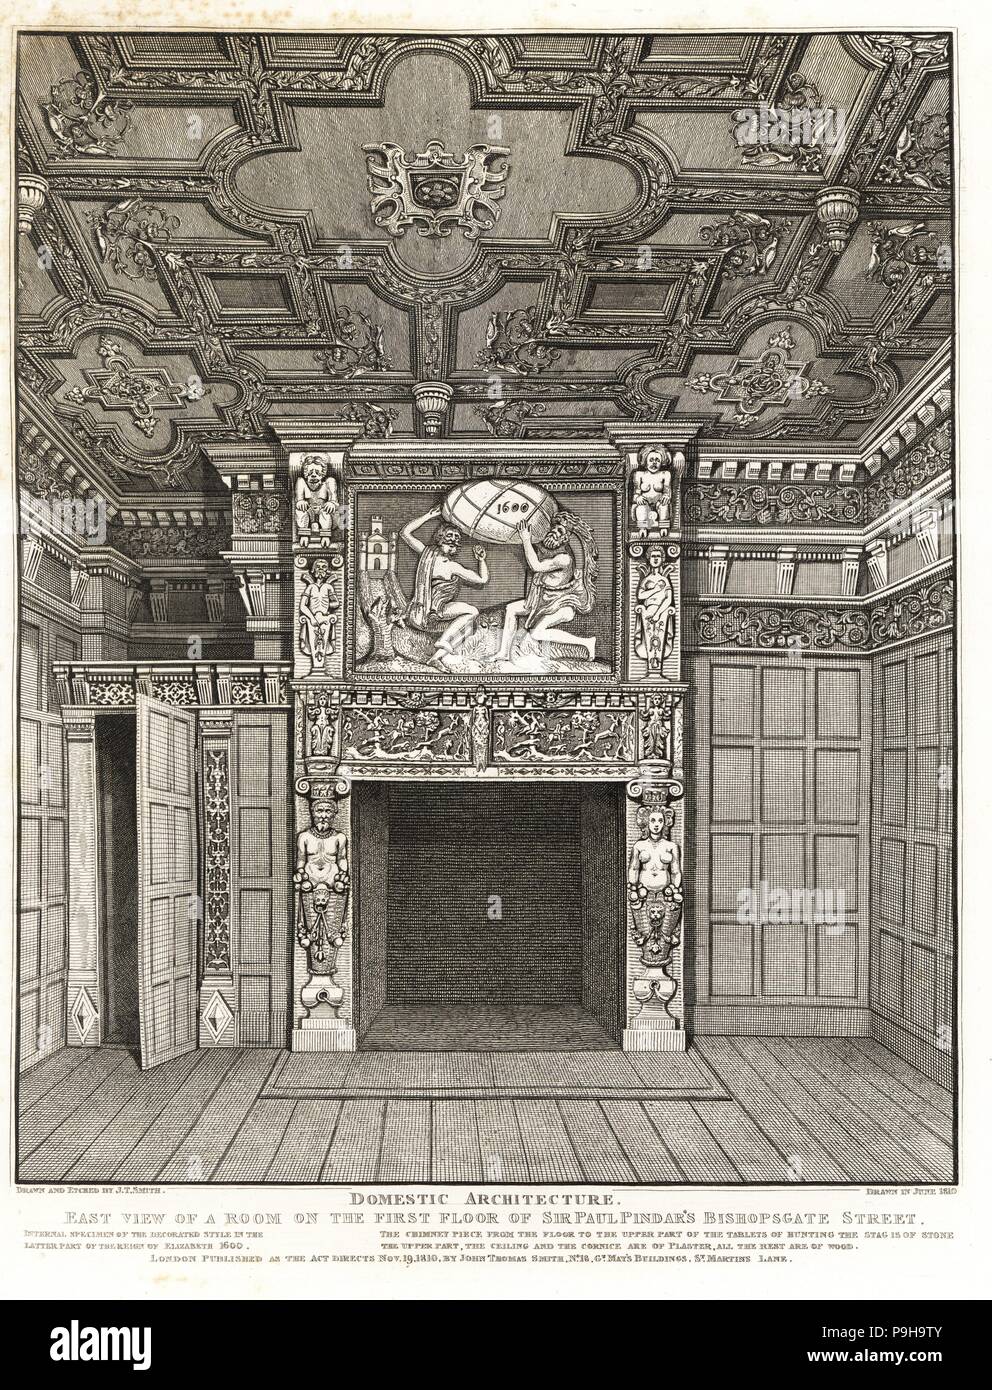 Room on the first floor of Sir Paul Pindar's house, Bishopsgate Street, 1810. Wood panel walls, stone chimney piece and plaster ceiling and cornices. Internal specimen of the Tudor Decorated style, latter part of the reign of Elizabeth, 1600. Copperplate engraving drawn and etched by John Thomas Smith from his Topography of London, 1810. Stock Photo